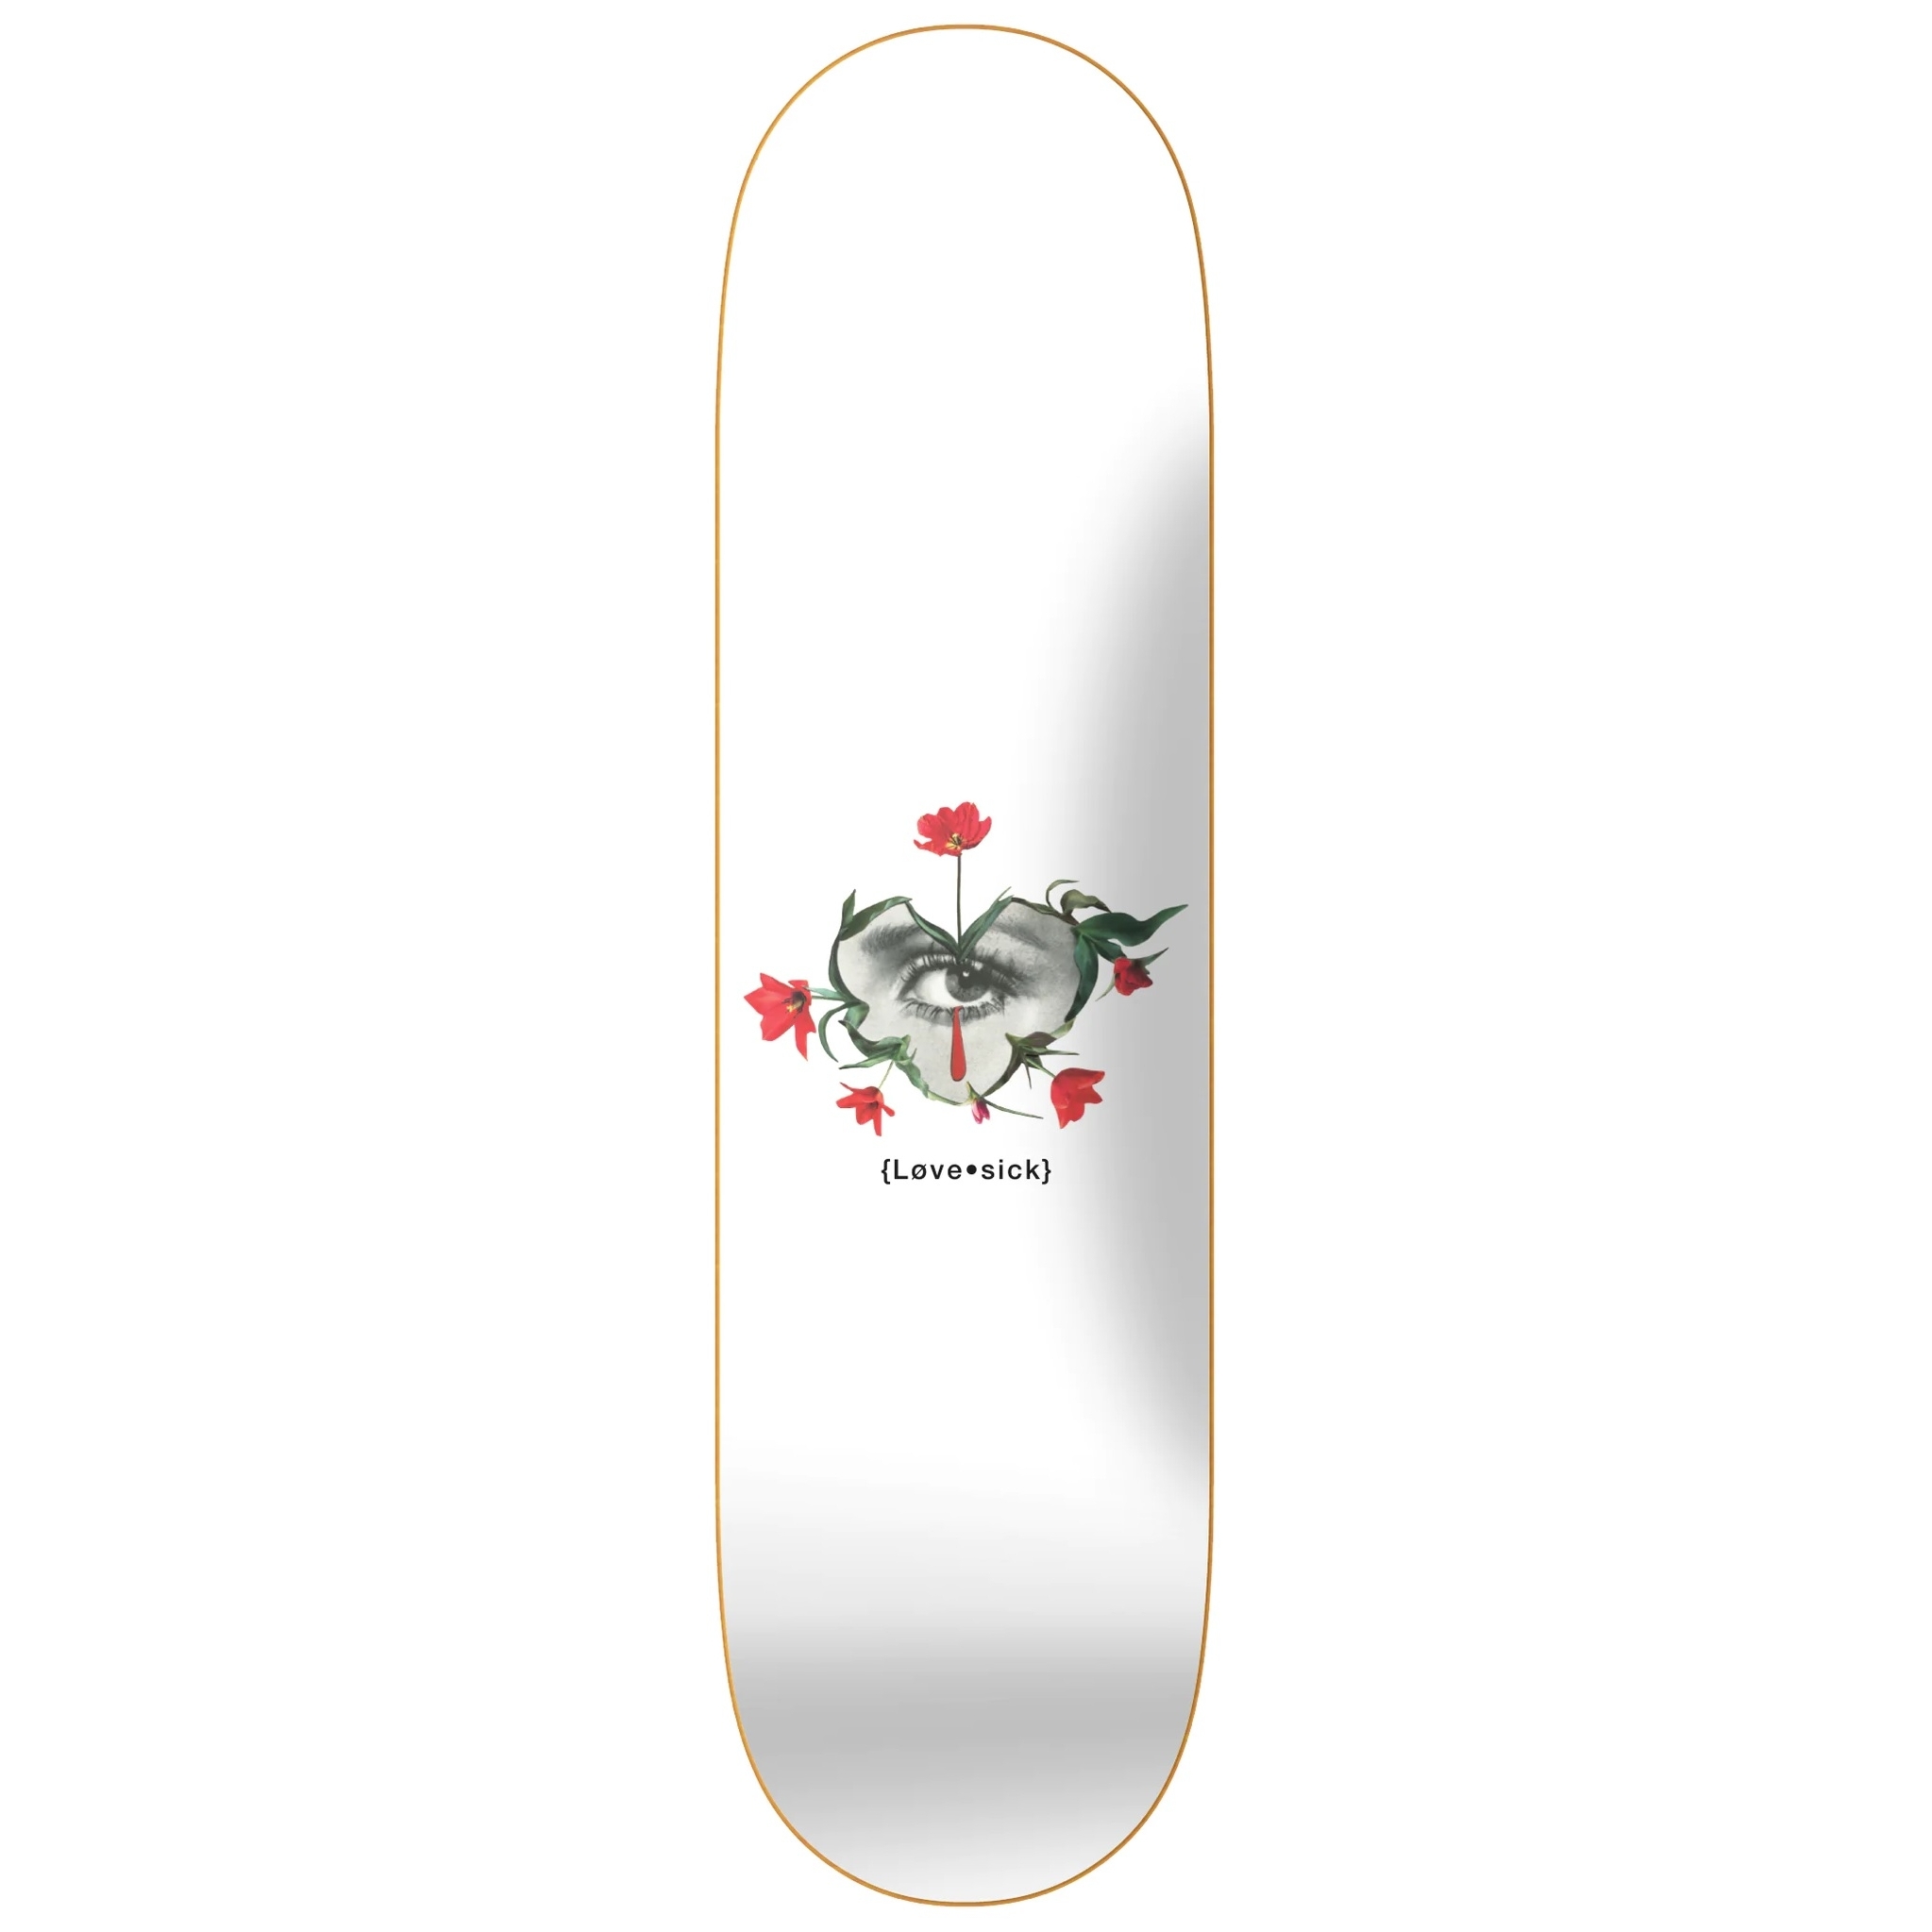 https://www.companybe.com/cowtown/product_photos/rd_images/rd_lovesick-skateboards-tomorrows-teardrop-deck.jpg